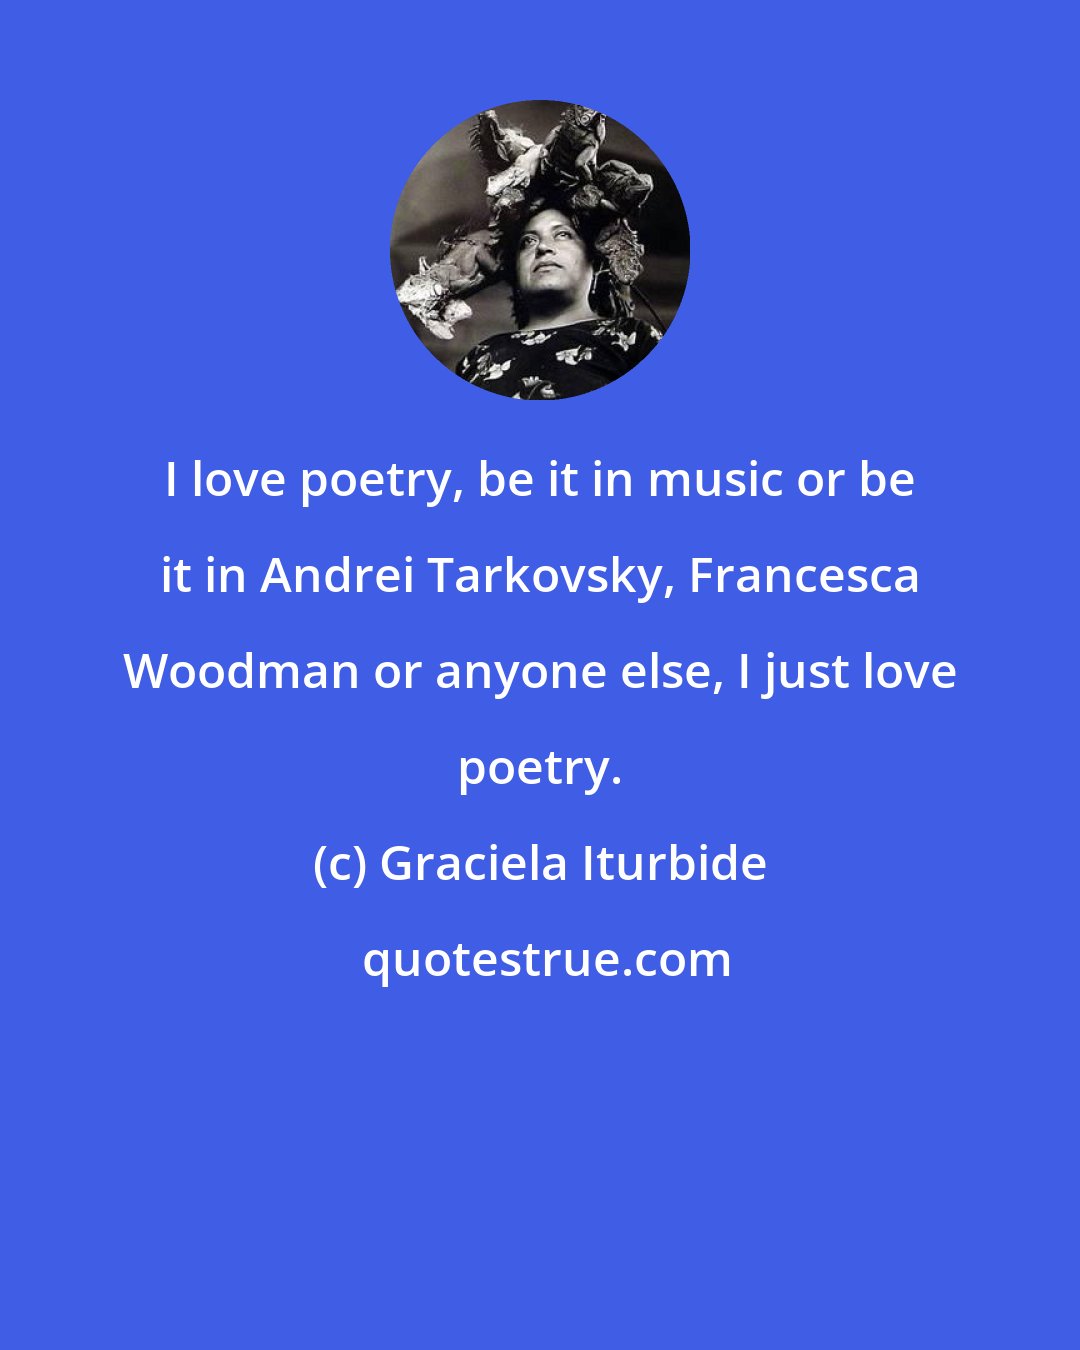 Graciela Iturbide: I love poetry, be it in music or be it in Andrei Tarkovsky, Francesca Woodman or anyone else, I just love poetry.